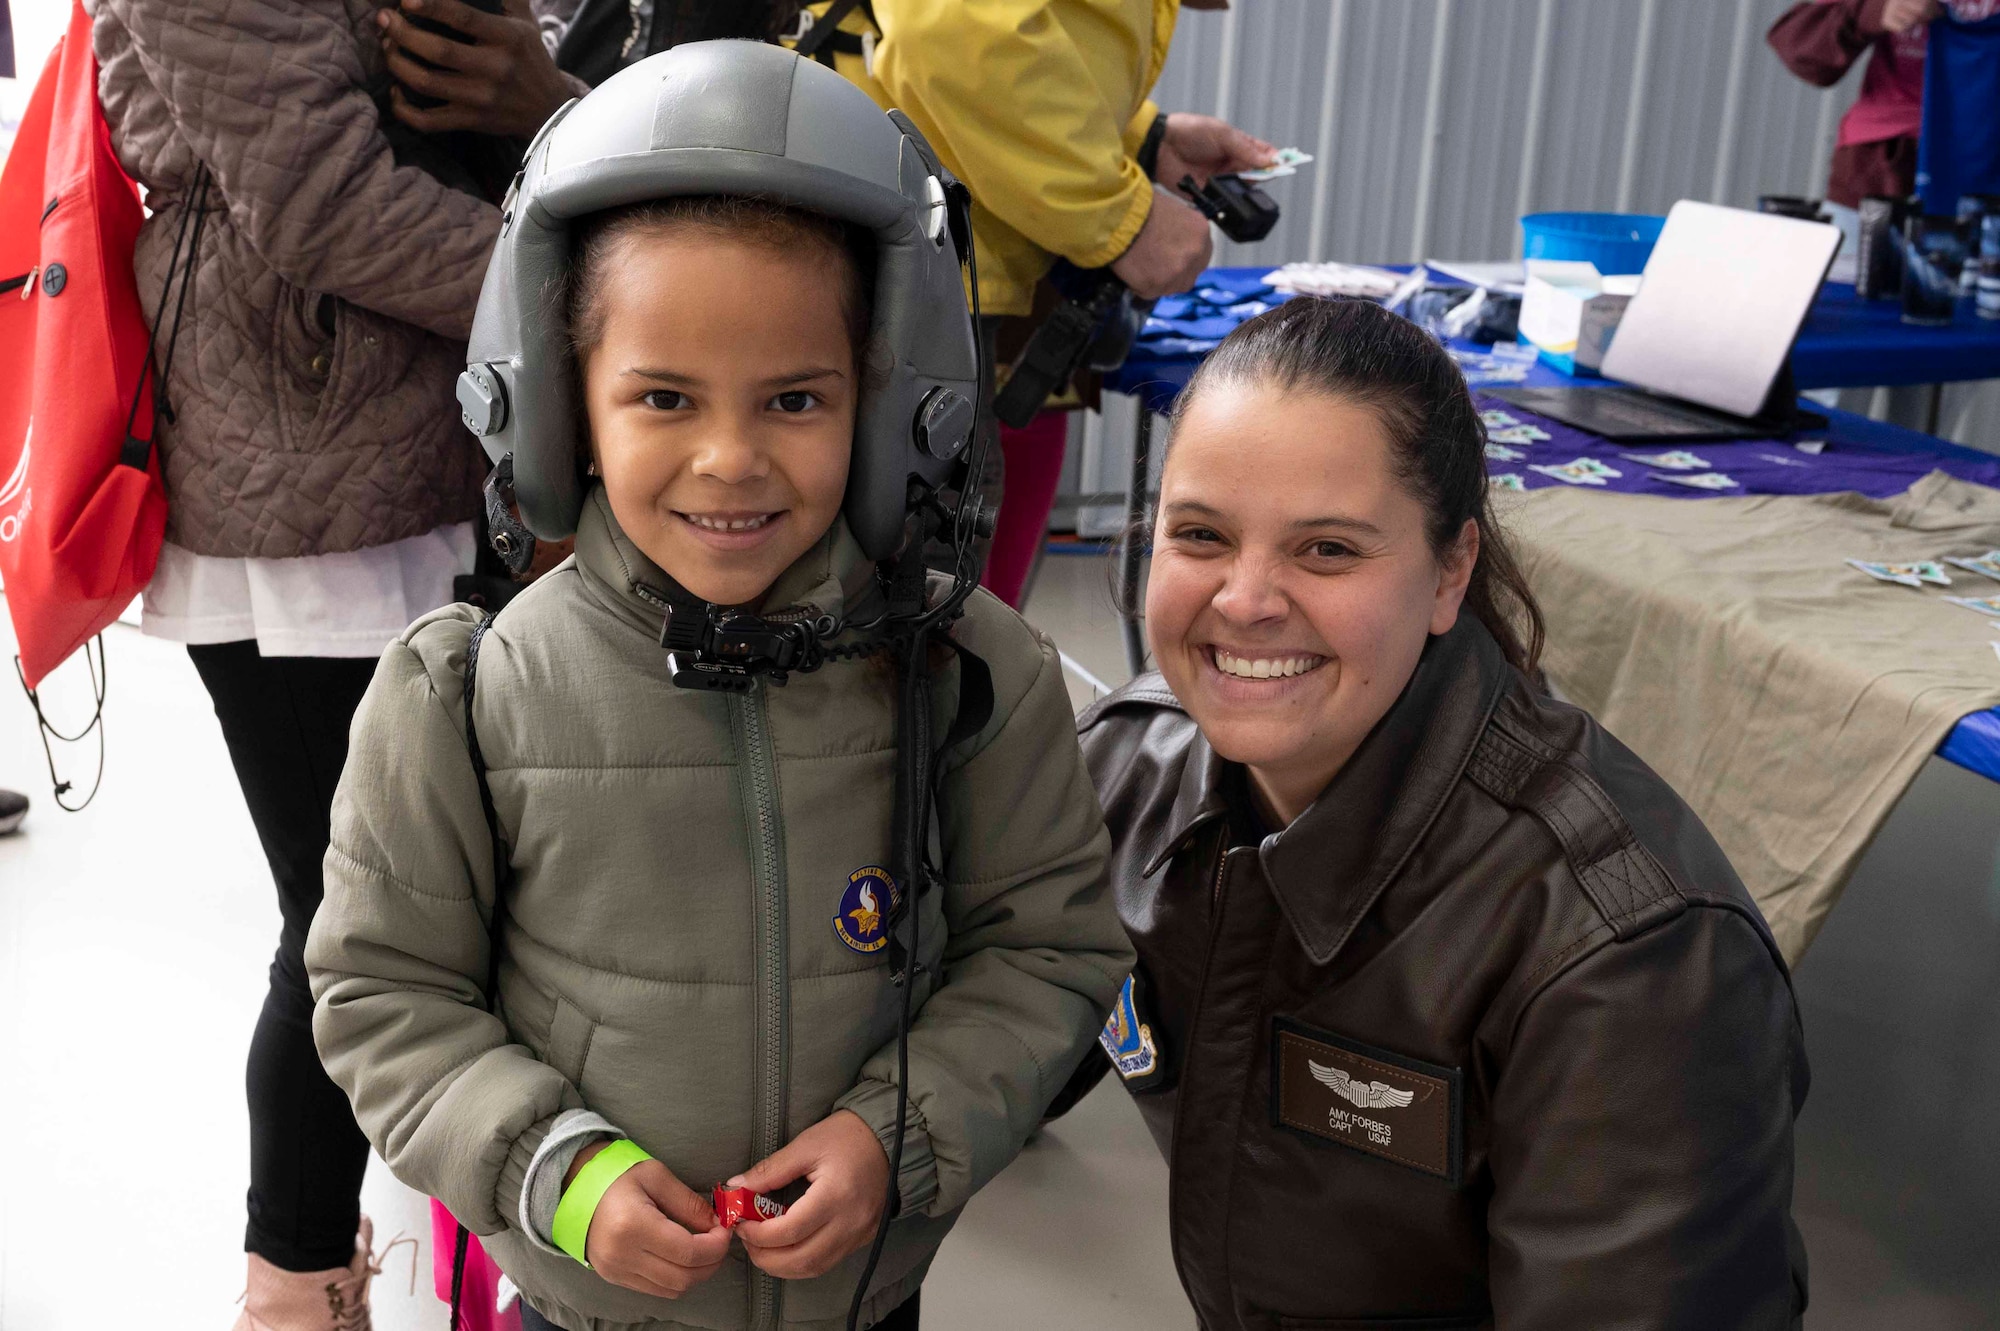 Capt. Amy Forbes, 96th Airlift Squadron pilot, poses with a young girl at the 7th annual Girls in Aviation Day hosted by the Women in Aviation at the Flying Cloud Airport in Eden Prairie, Minn., on Sept. 25, 2021. After the 2020 event was cancelled due to the COVID-19 pandemic, participating in this year’s event was something the wing’s Reserve Citizen Airmen looked forward to.